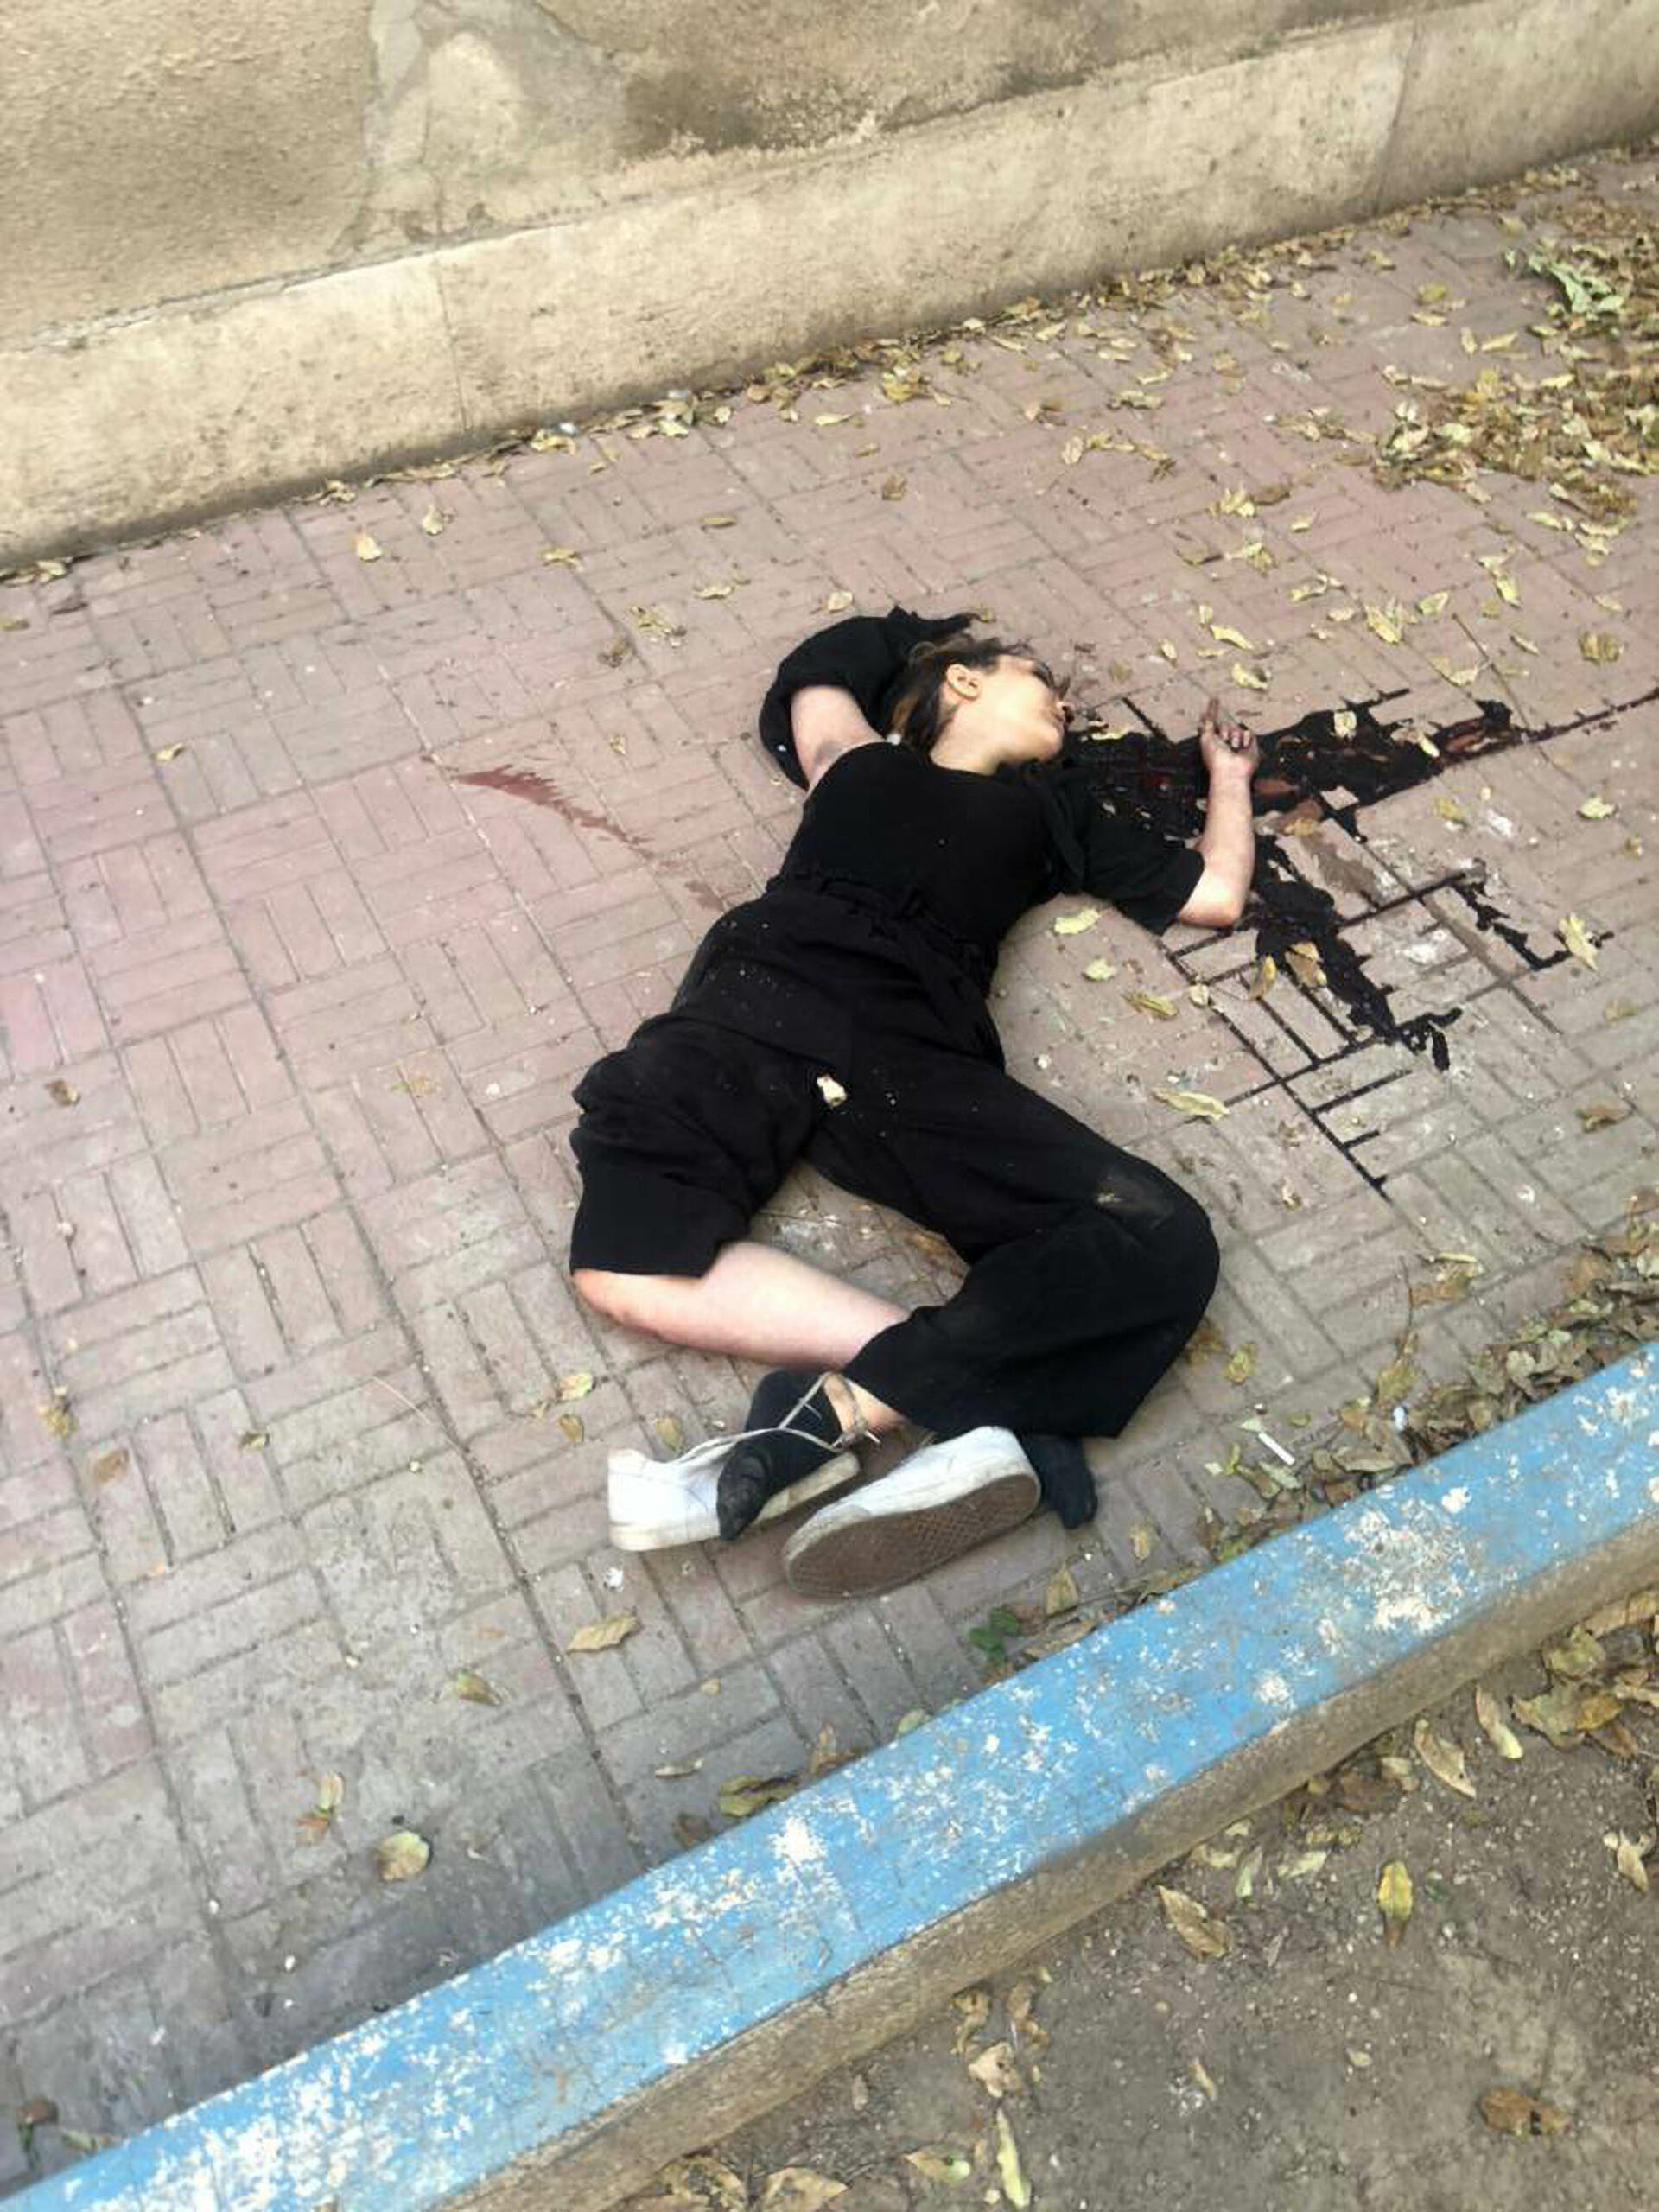 Read more about the article IRAN FAKE NEWS: Is This Iran’s Sickest Stunt: Was Tragic Teen’s Broken Body Used To Fake Fall Picture?